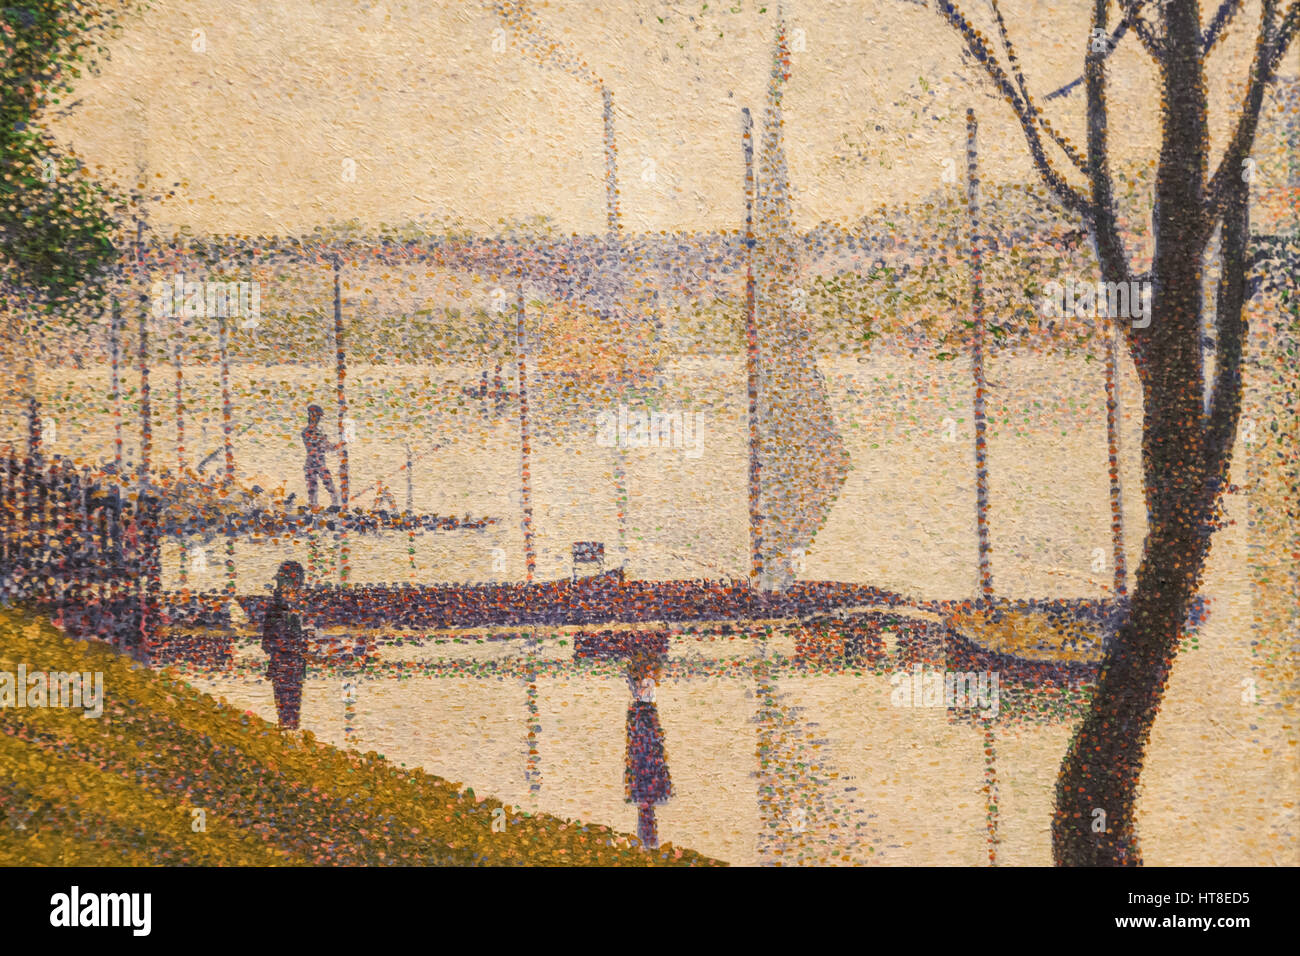 Painting titled The Bridge at Courbevoie by Georges Seurat dated 1886-87 Stock Photo